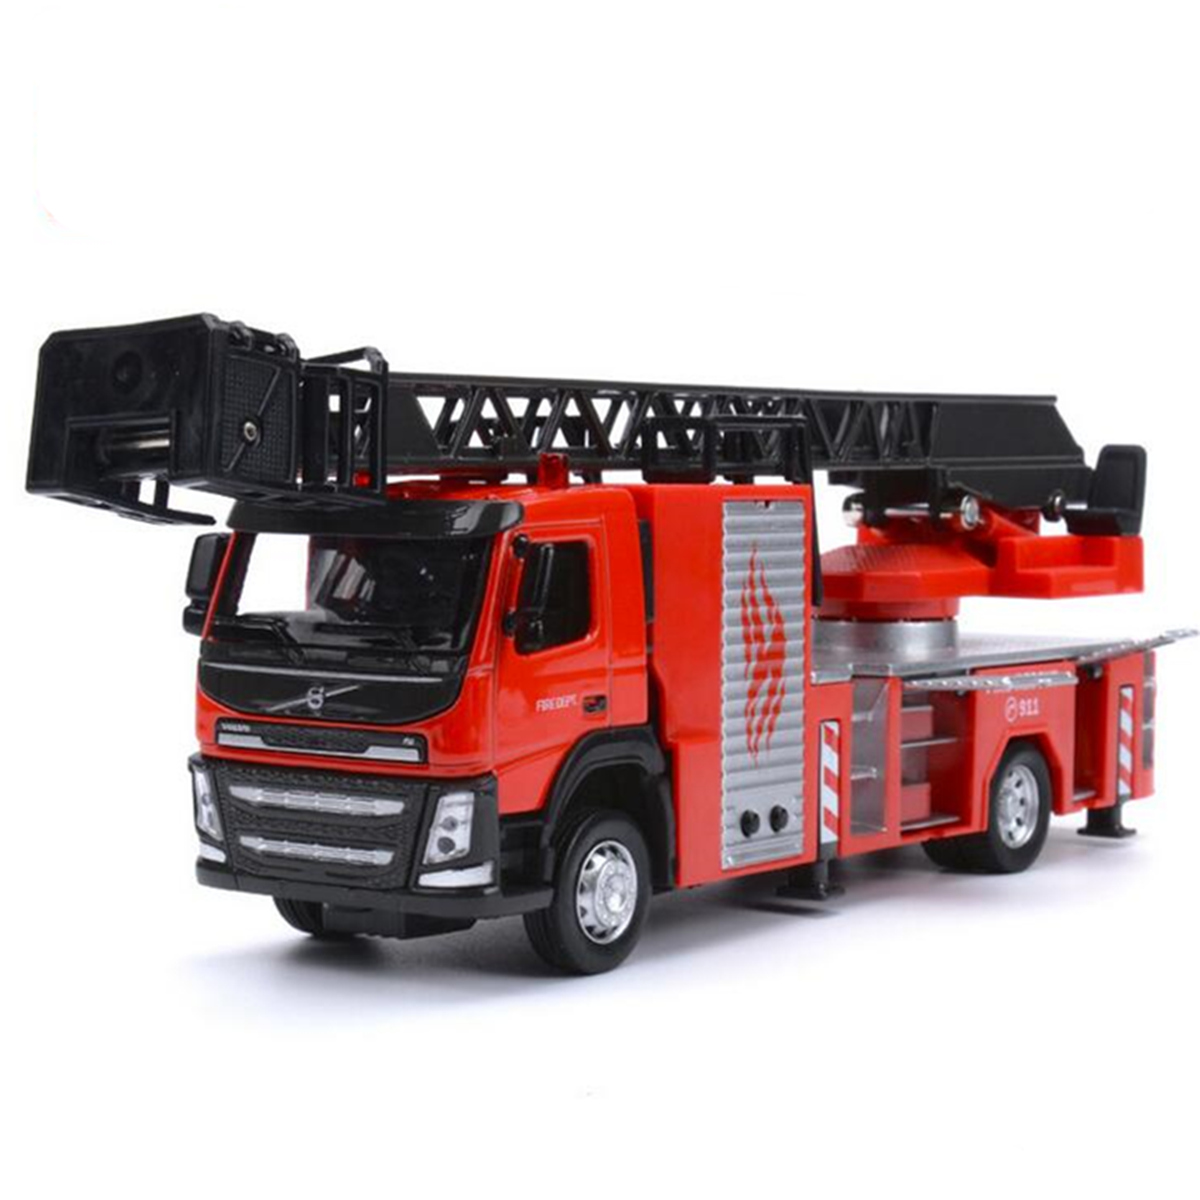 

1:50 Scale Diecast Model Engine Truck Engineering Car Model With Sound & Light